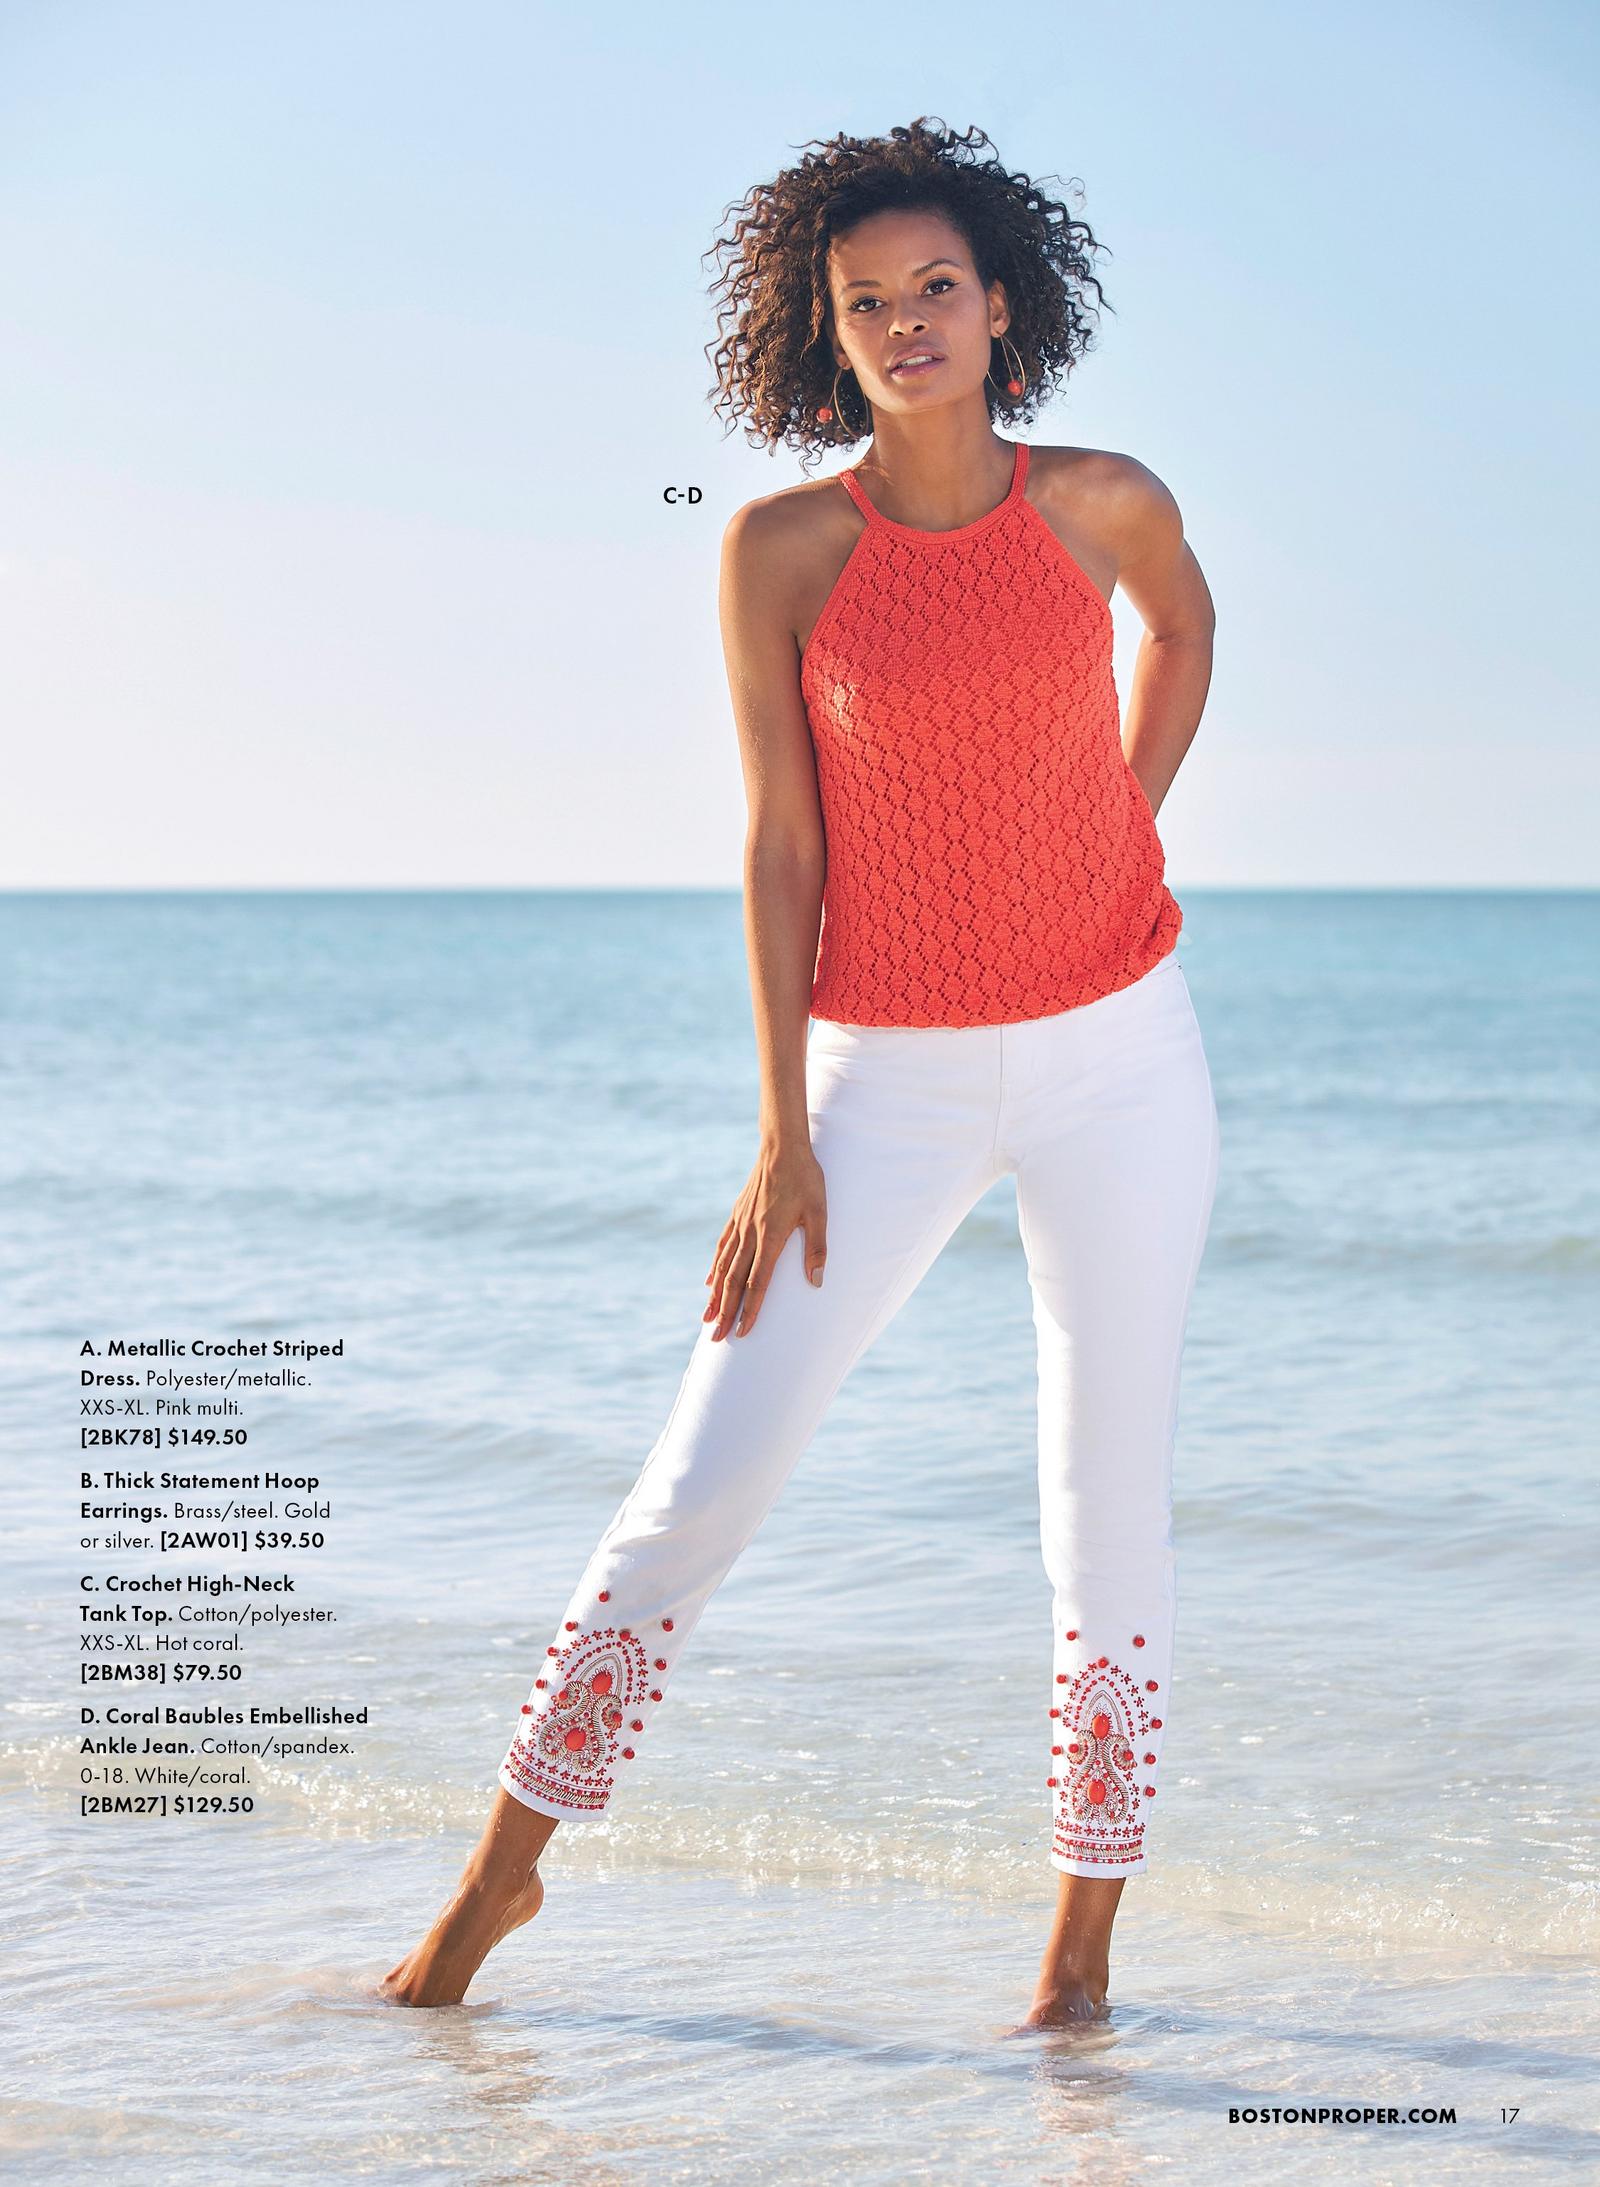 Model is wearing the Coral Baubles Embellished Ankle Jean in white and the Crochet High Neck Tank Top in Coral.